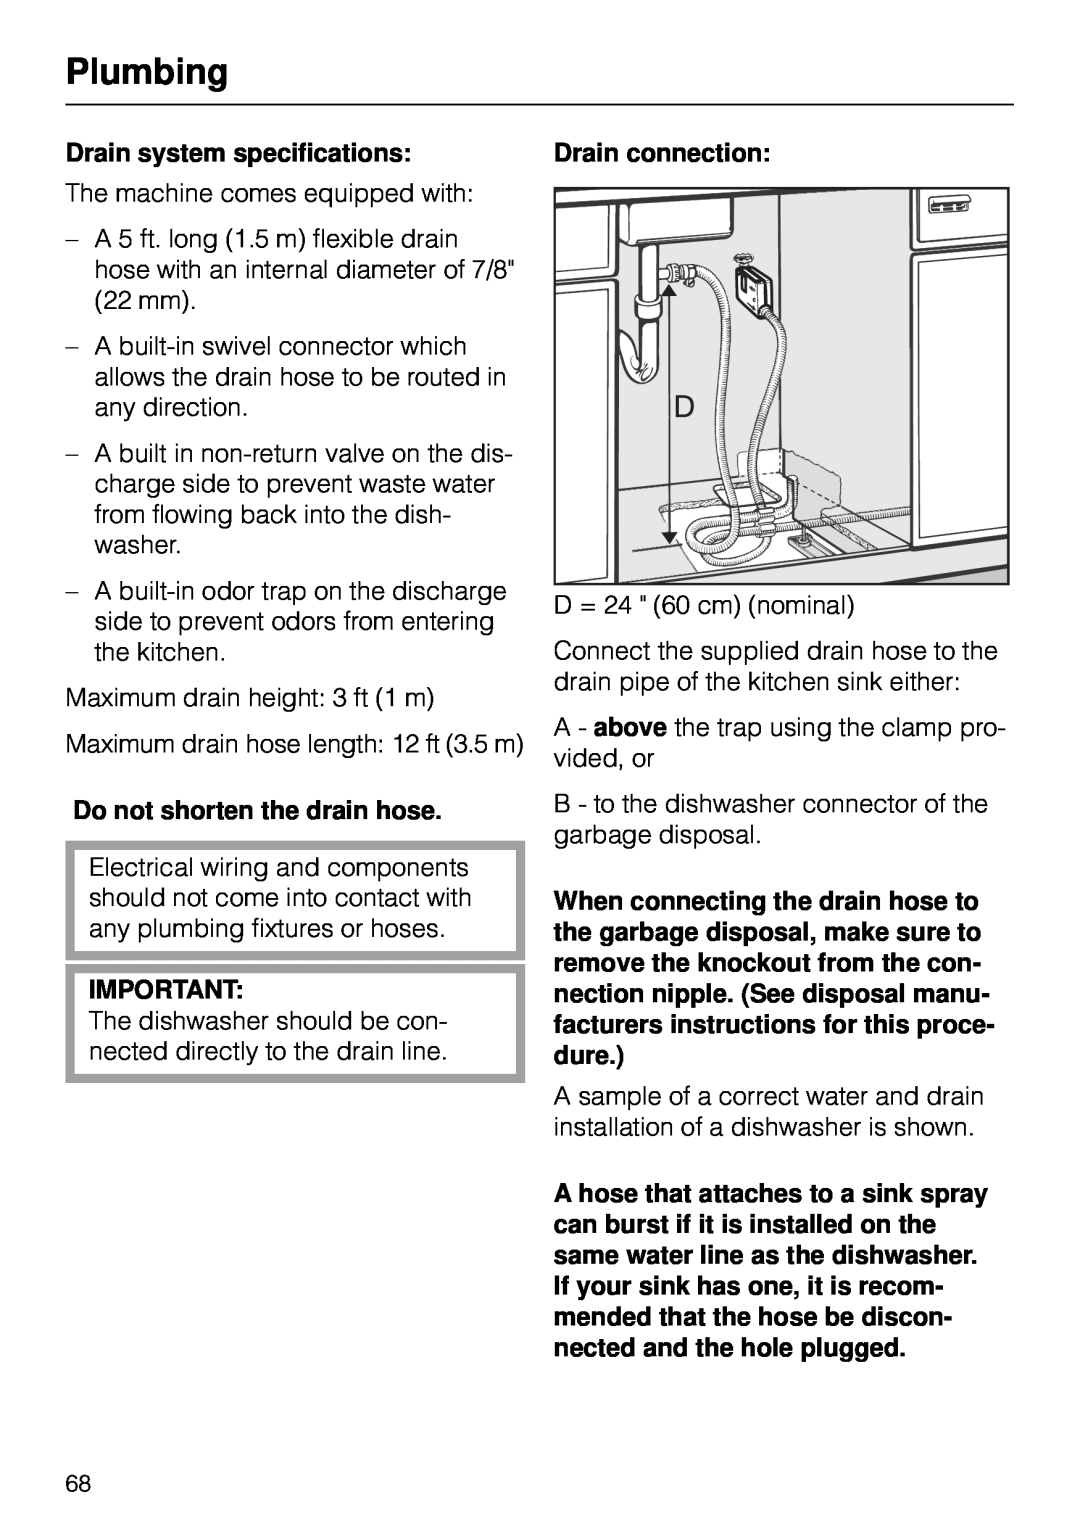 Miele G 890 manual Plumbing, Drain system specifications, Do not shorten the drain hose, Drain connection 